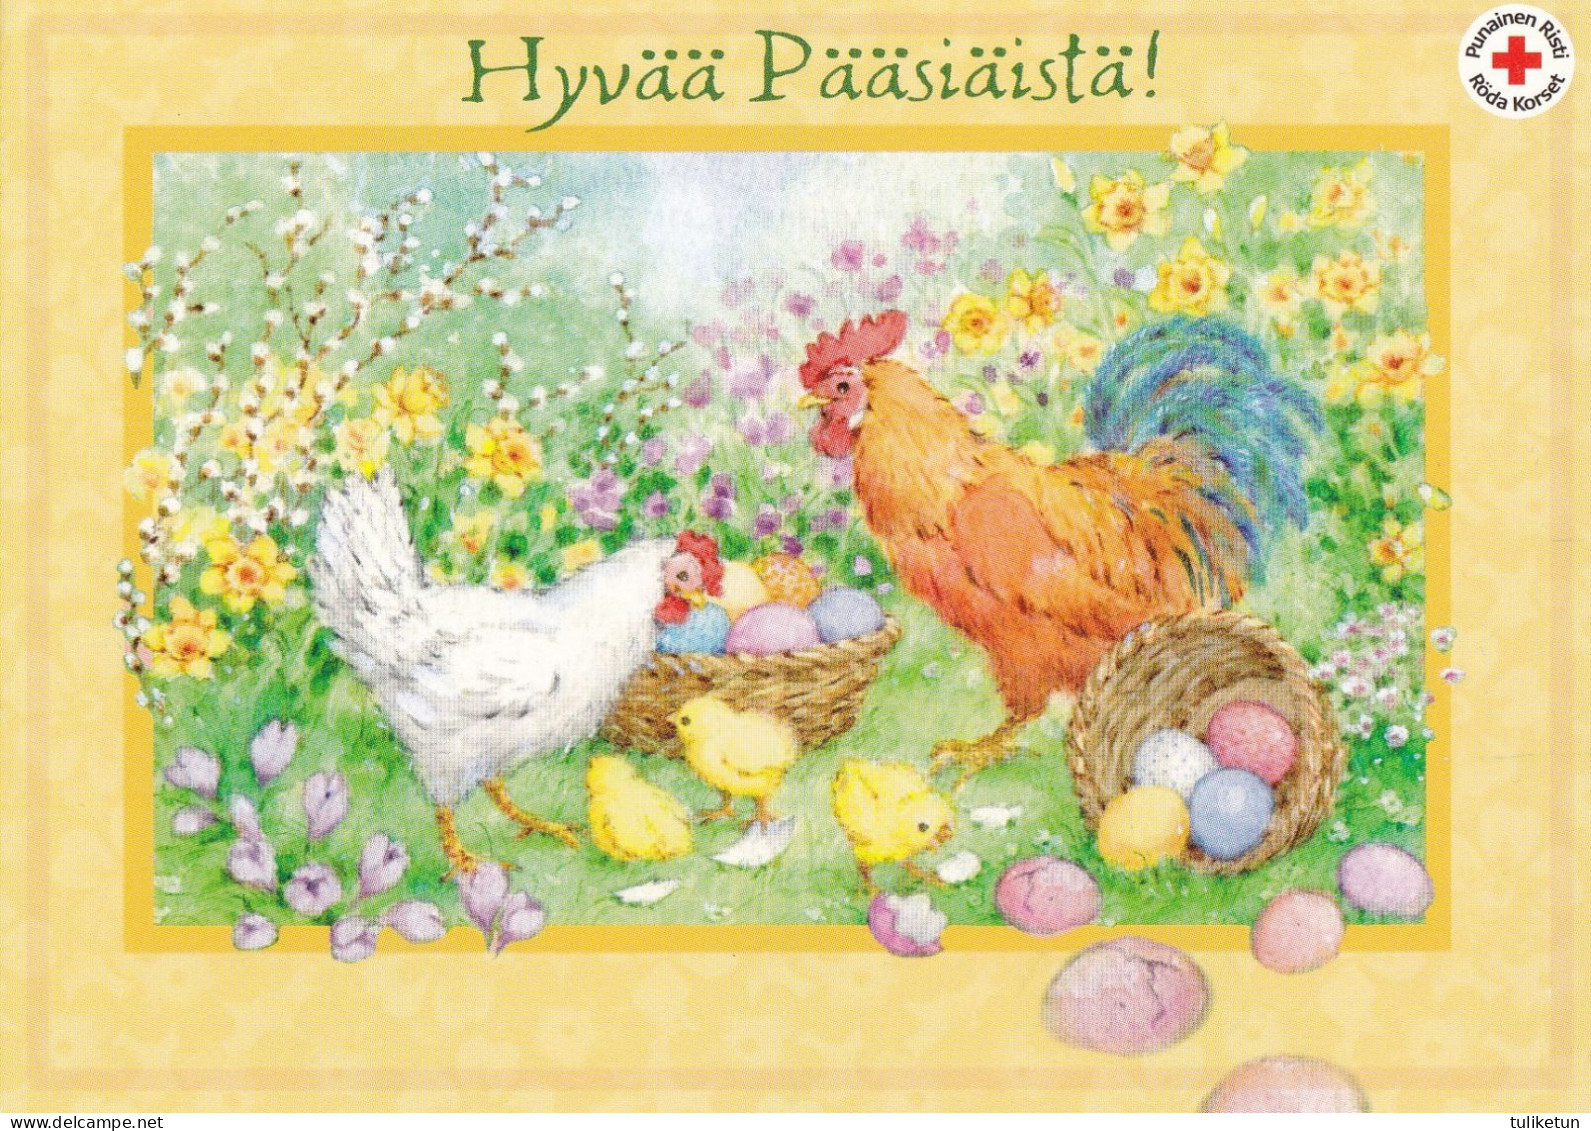 Postal Stationery - Cock & Chicken - Eggs - Chicks - Easter - Red Cross - Suomi Finland - Postage Paid - Enteros Postales